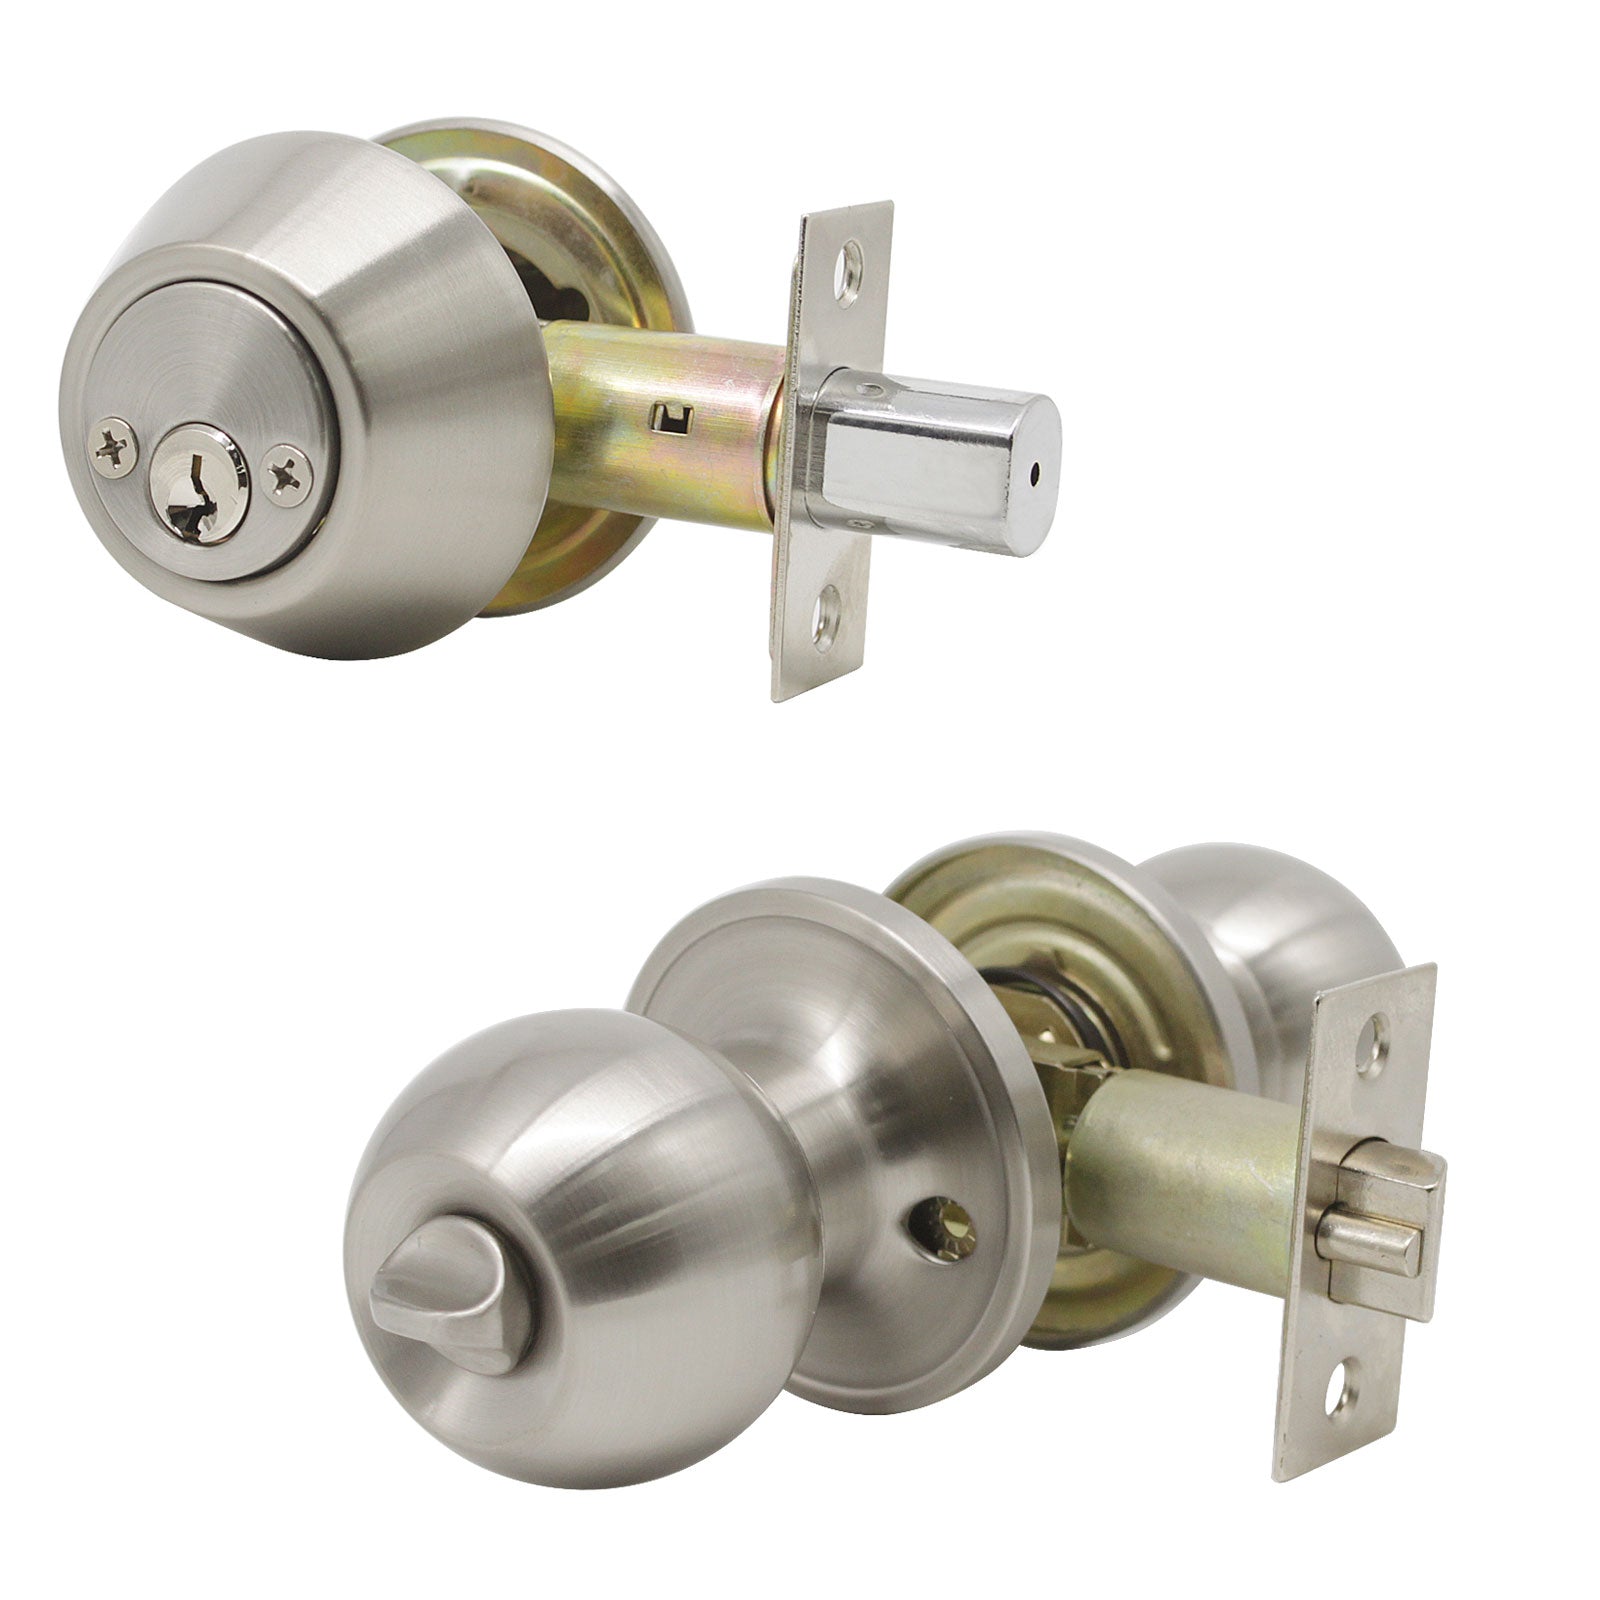 Probrico (3 Set) Entry Door Knobs and Double Cylinder Deabolt Lock Set with 